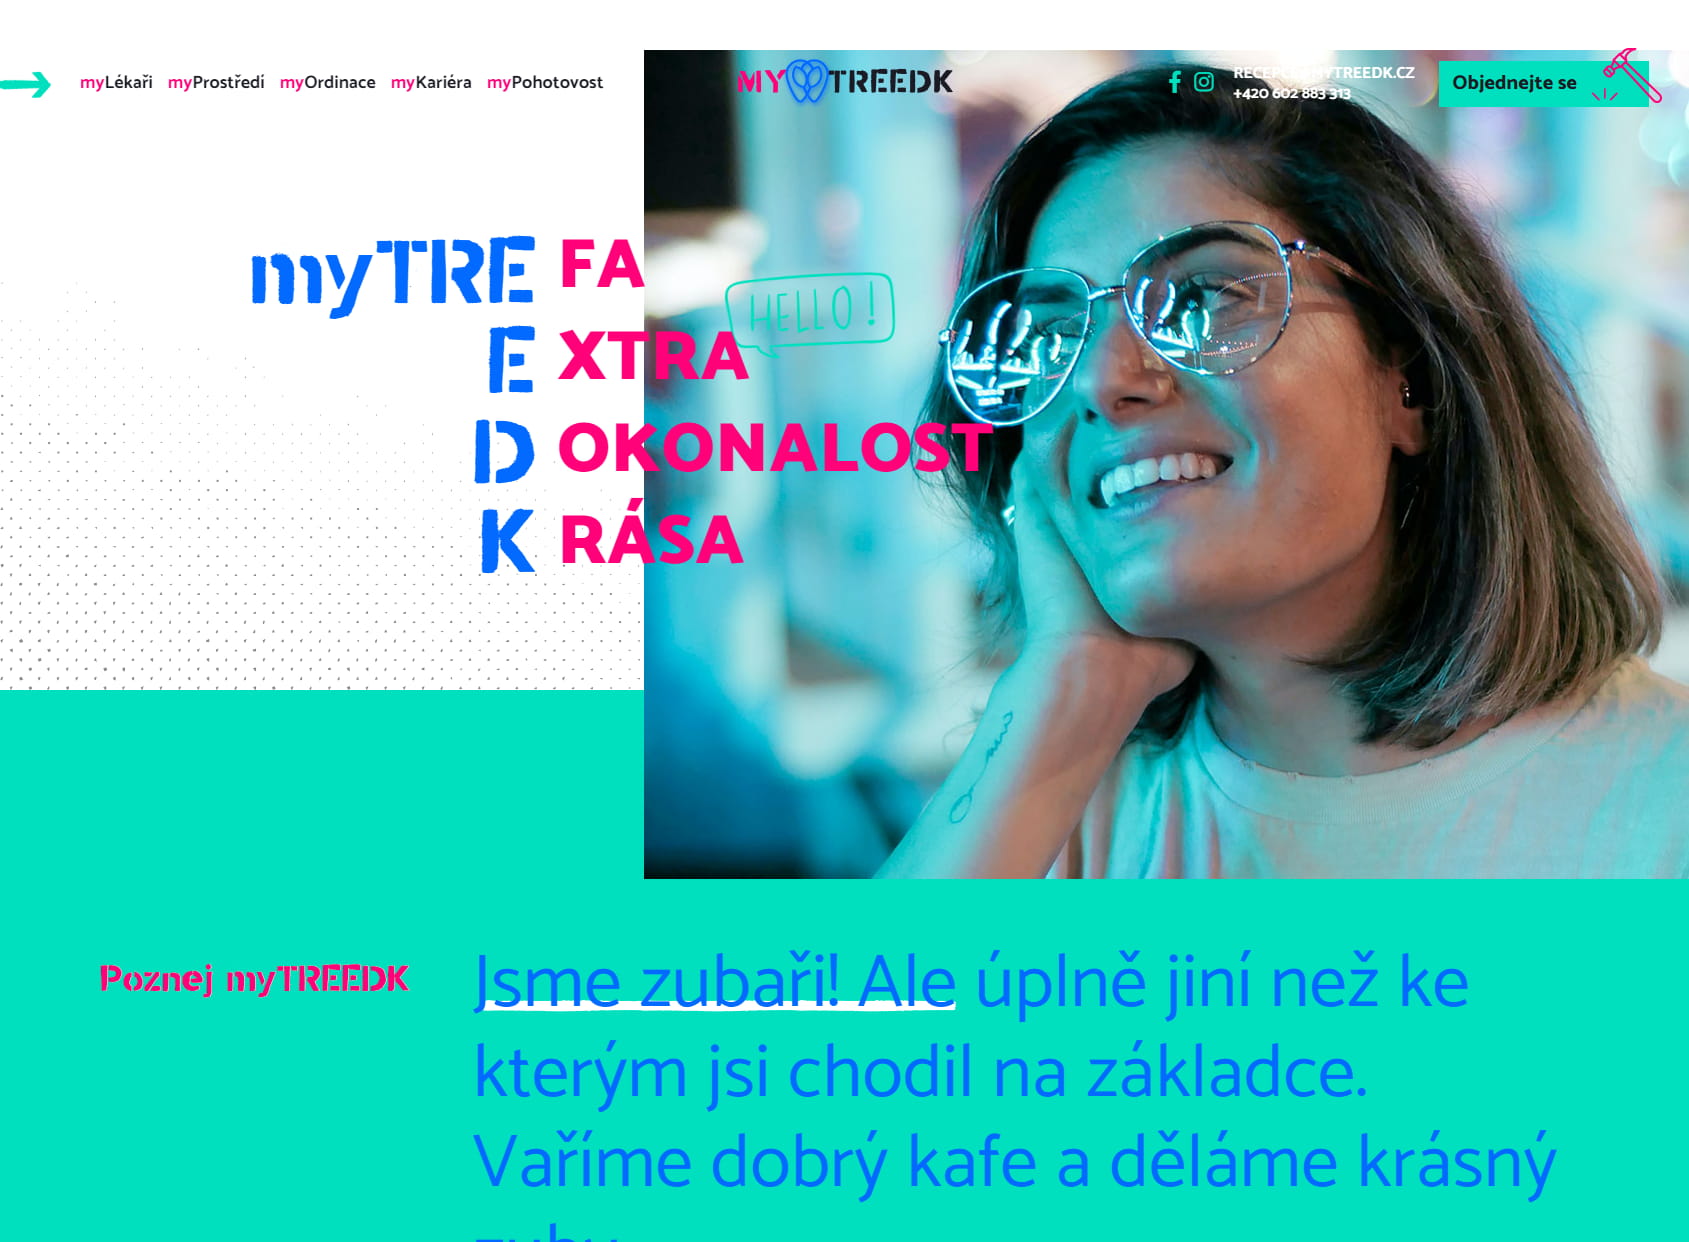 myTREEDK